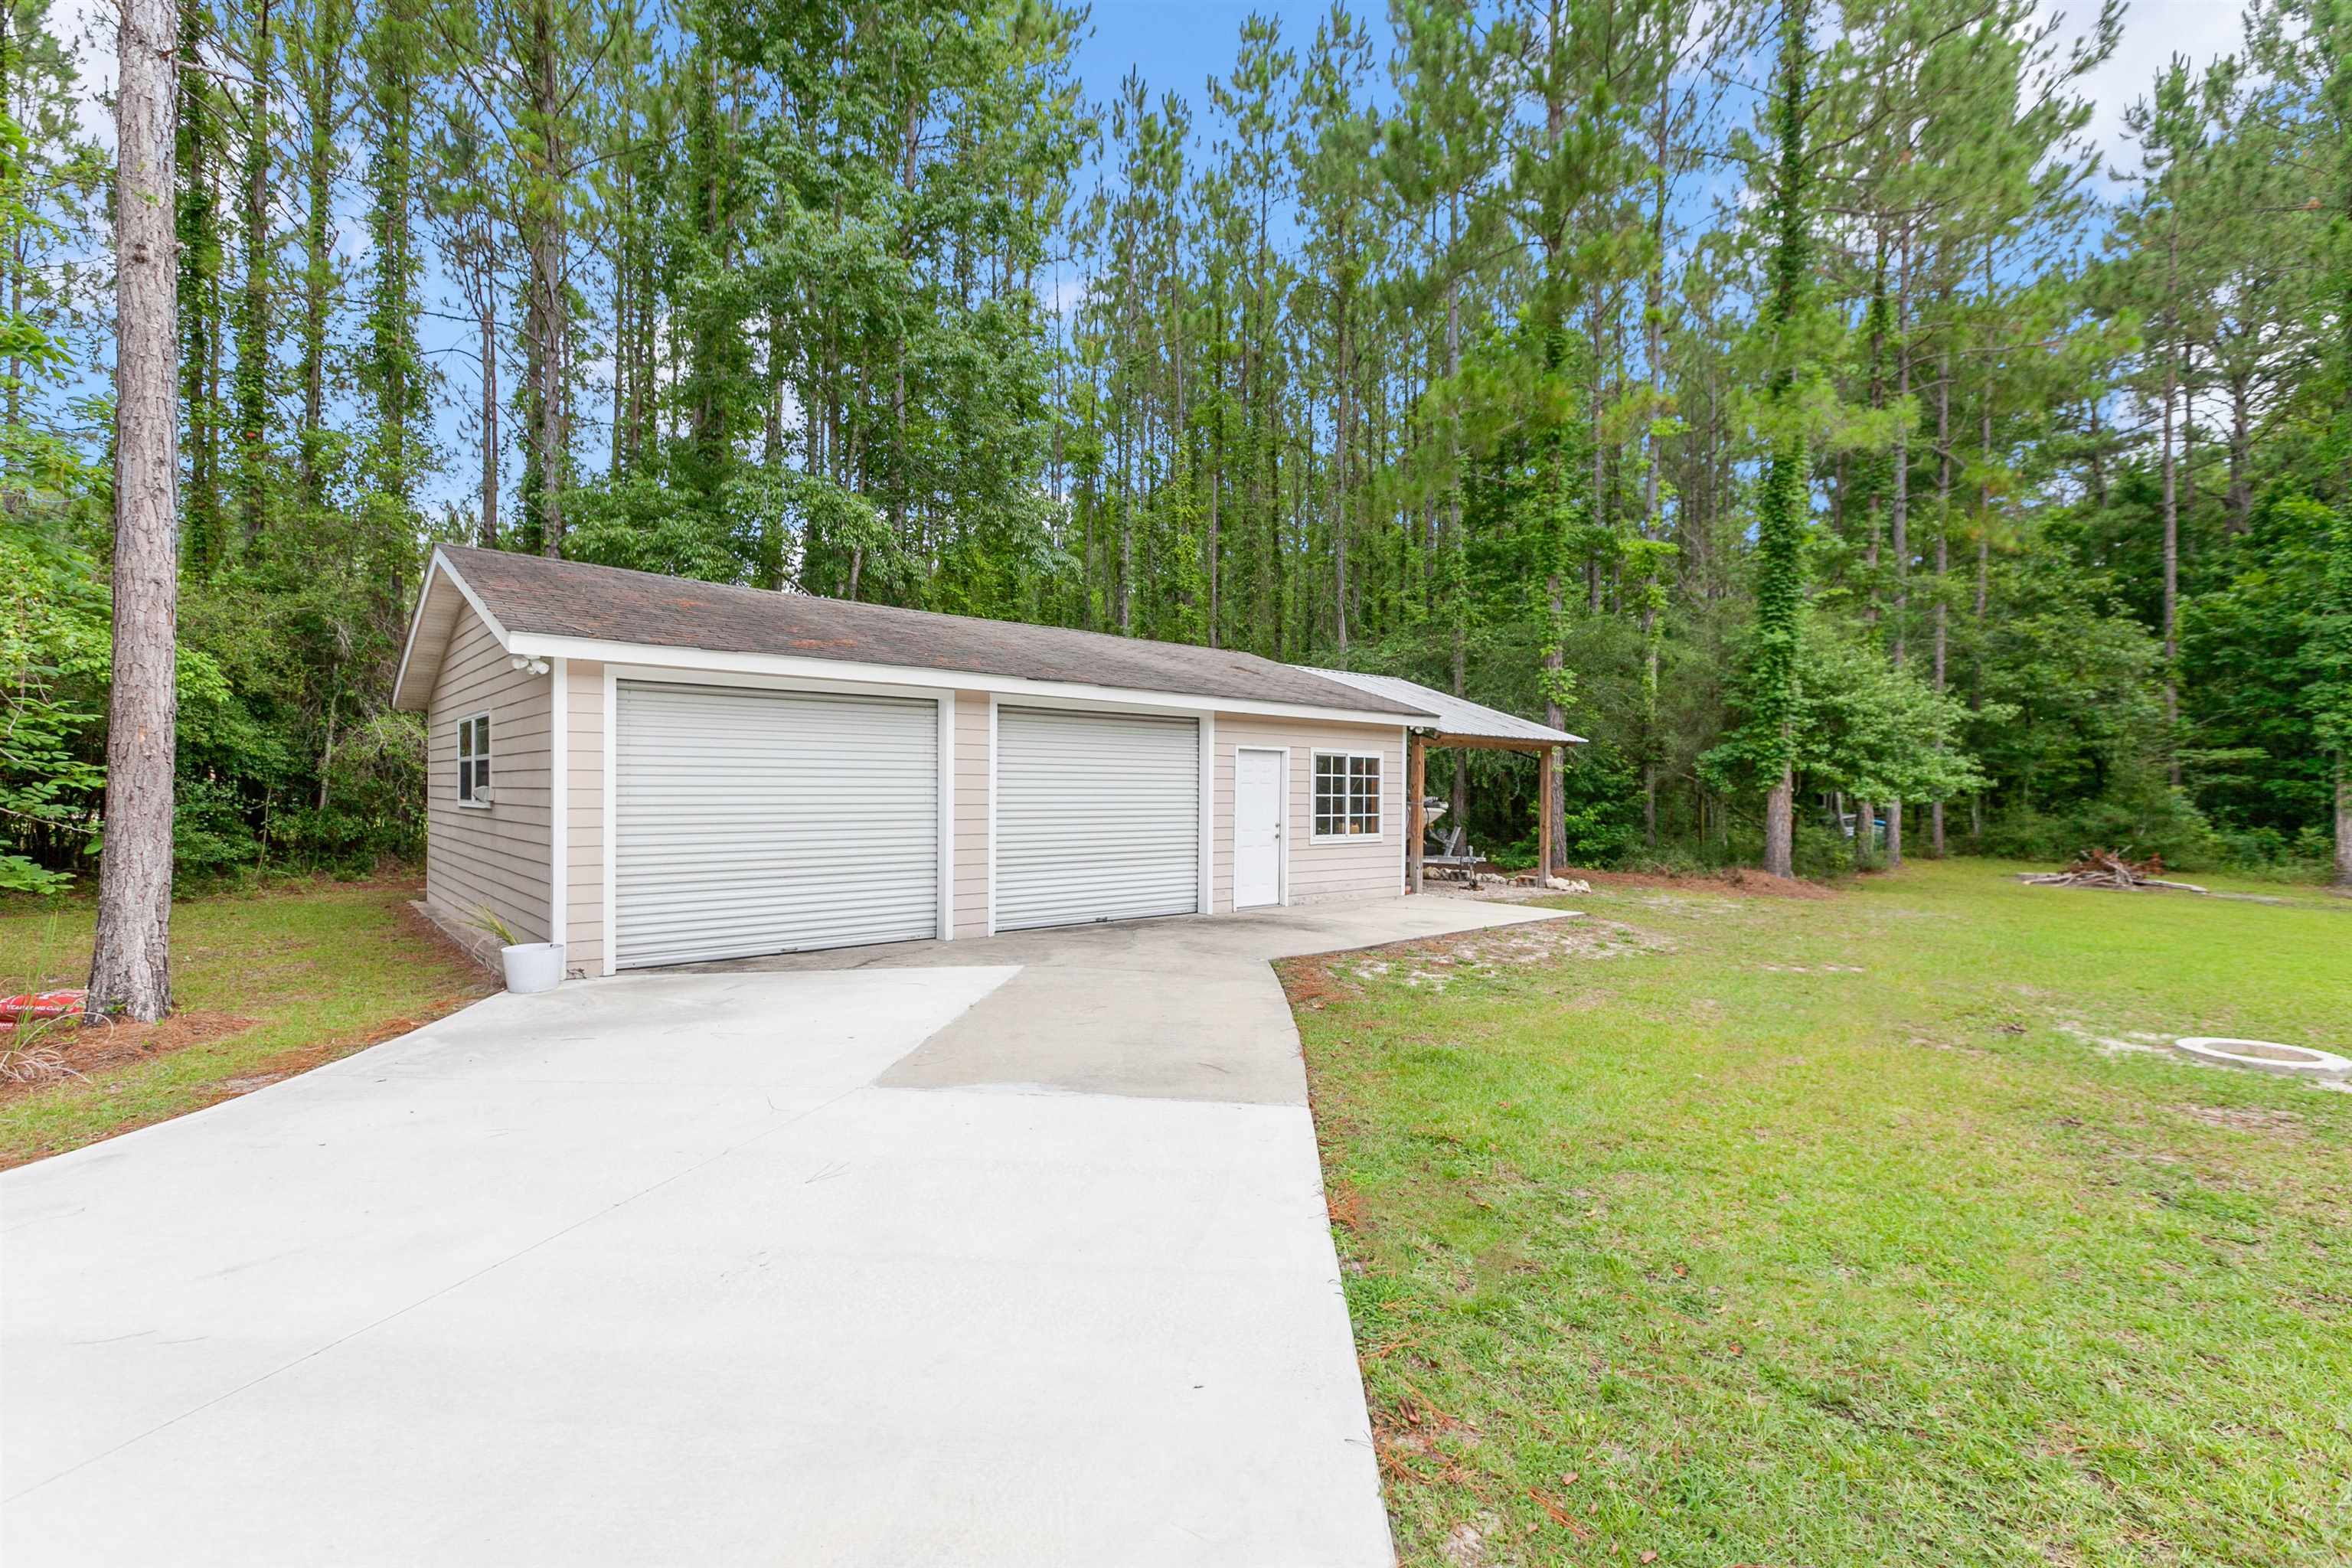 148 Sand Pine Trail,CRAWFORDVILLE,Florida 32327,4 Bedrooms Bedrooms,3 BathroomsBathrooms,Detached single family,148 Sand Pine Trail,368843